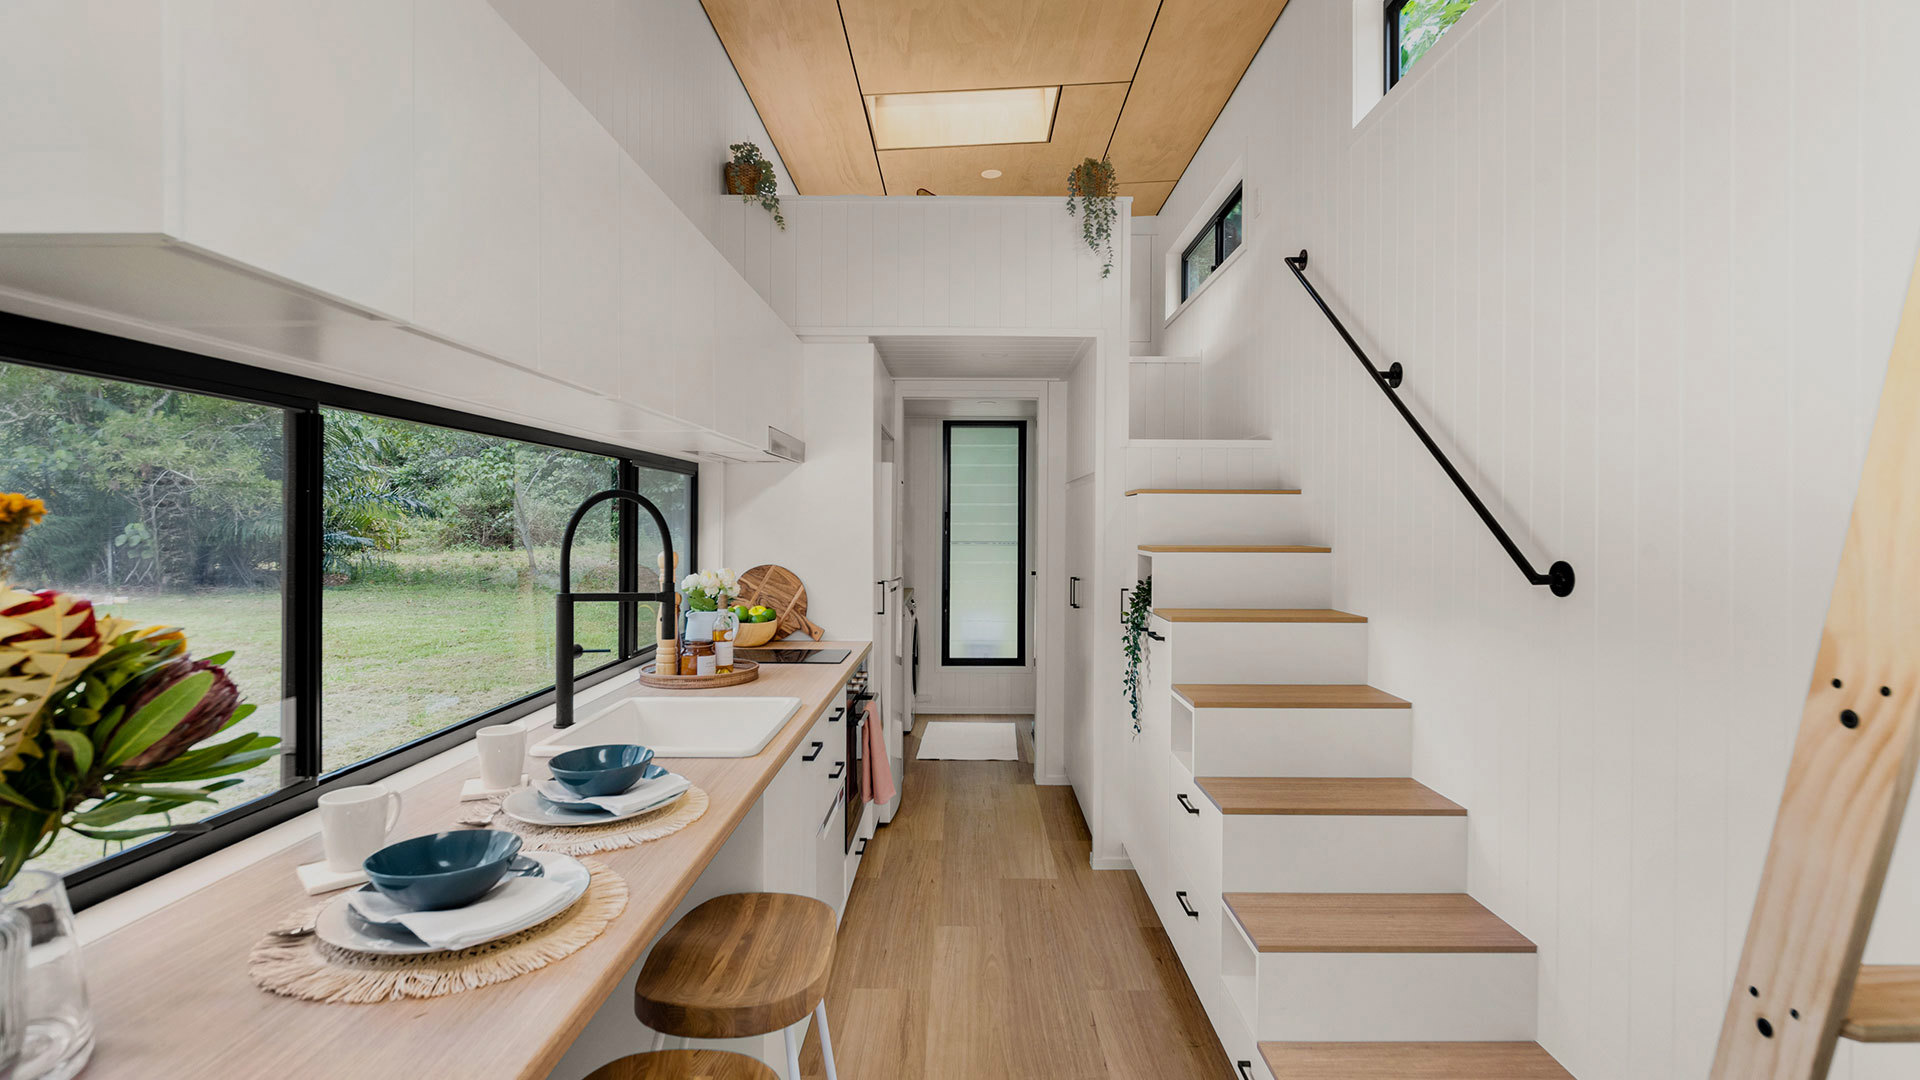 26-year-old pays $0 to live in a 'luxury tiny home' she built in